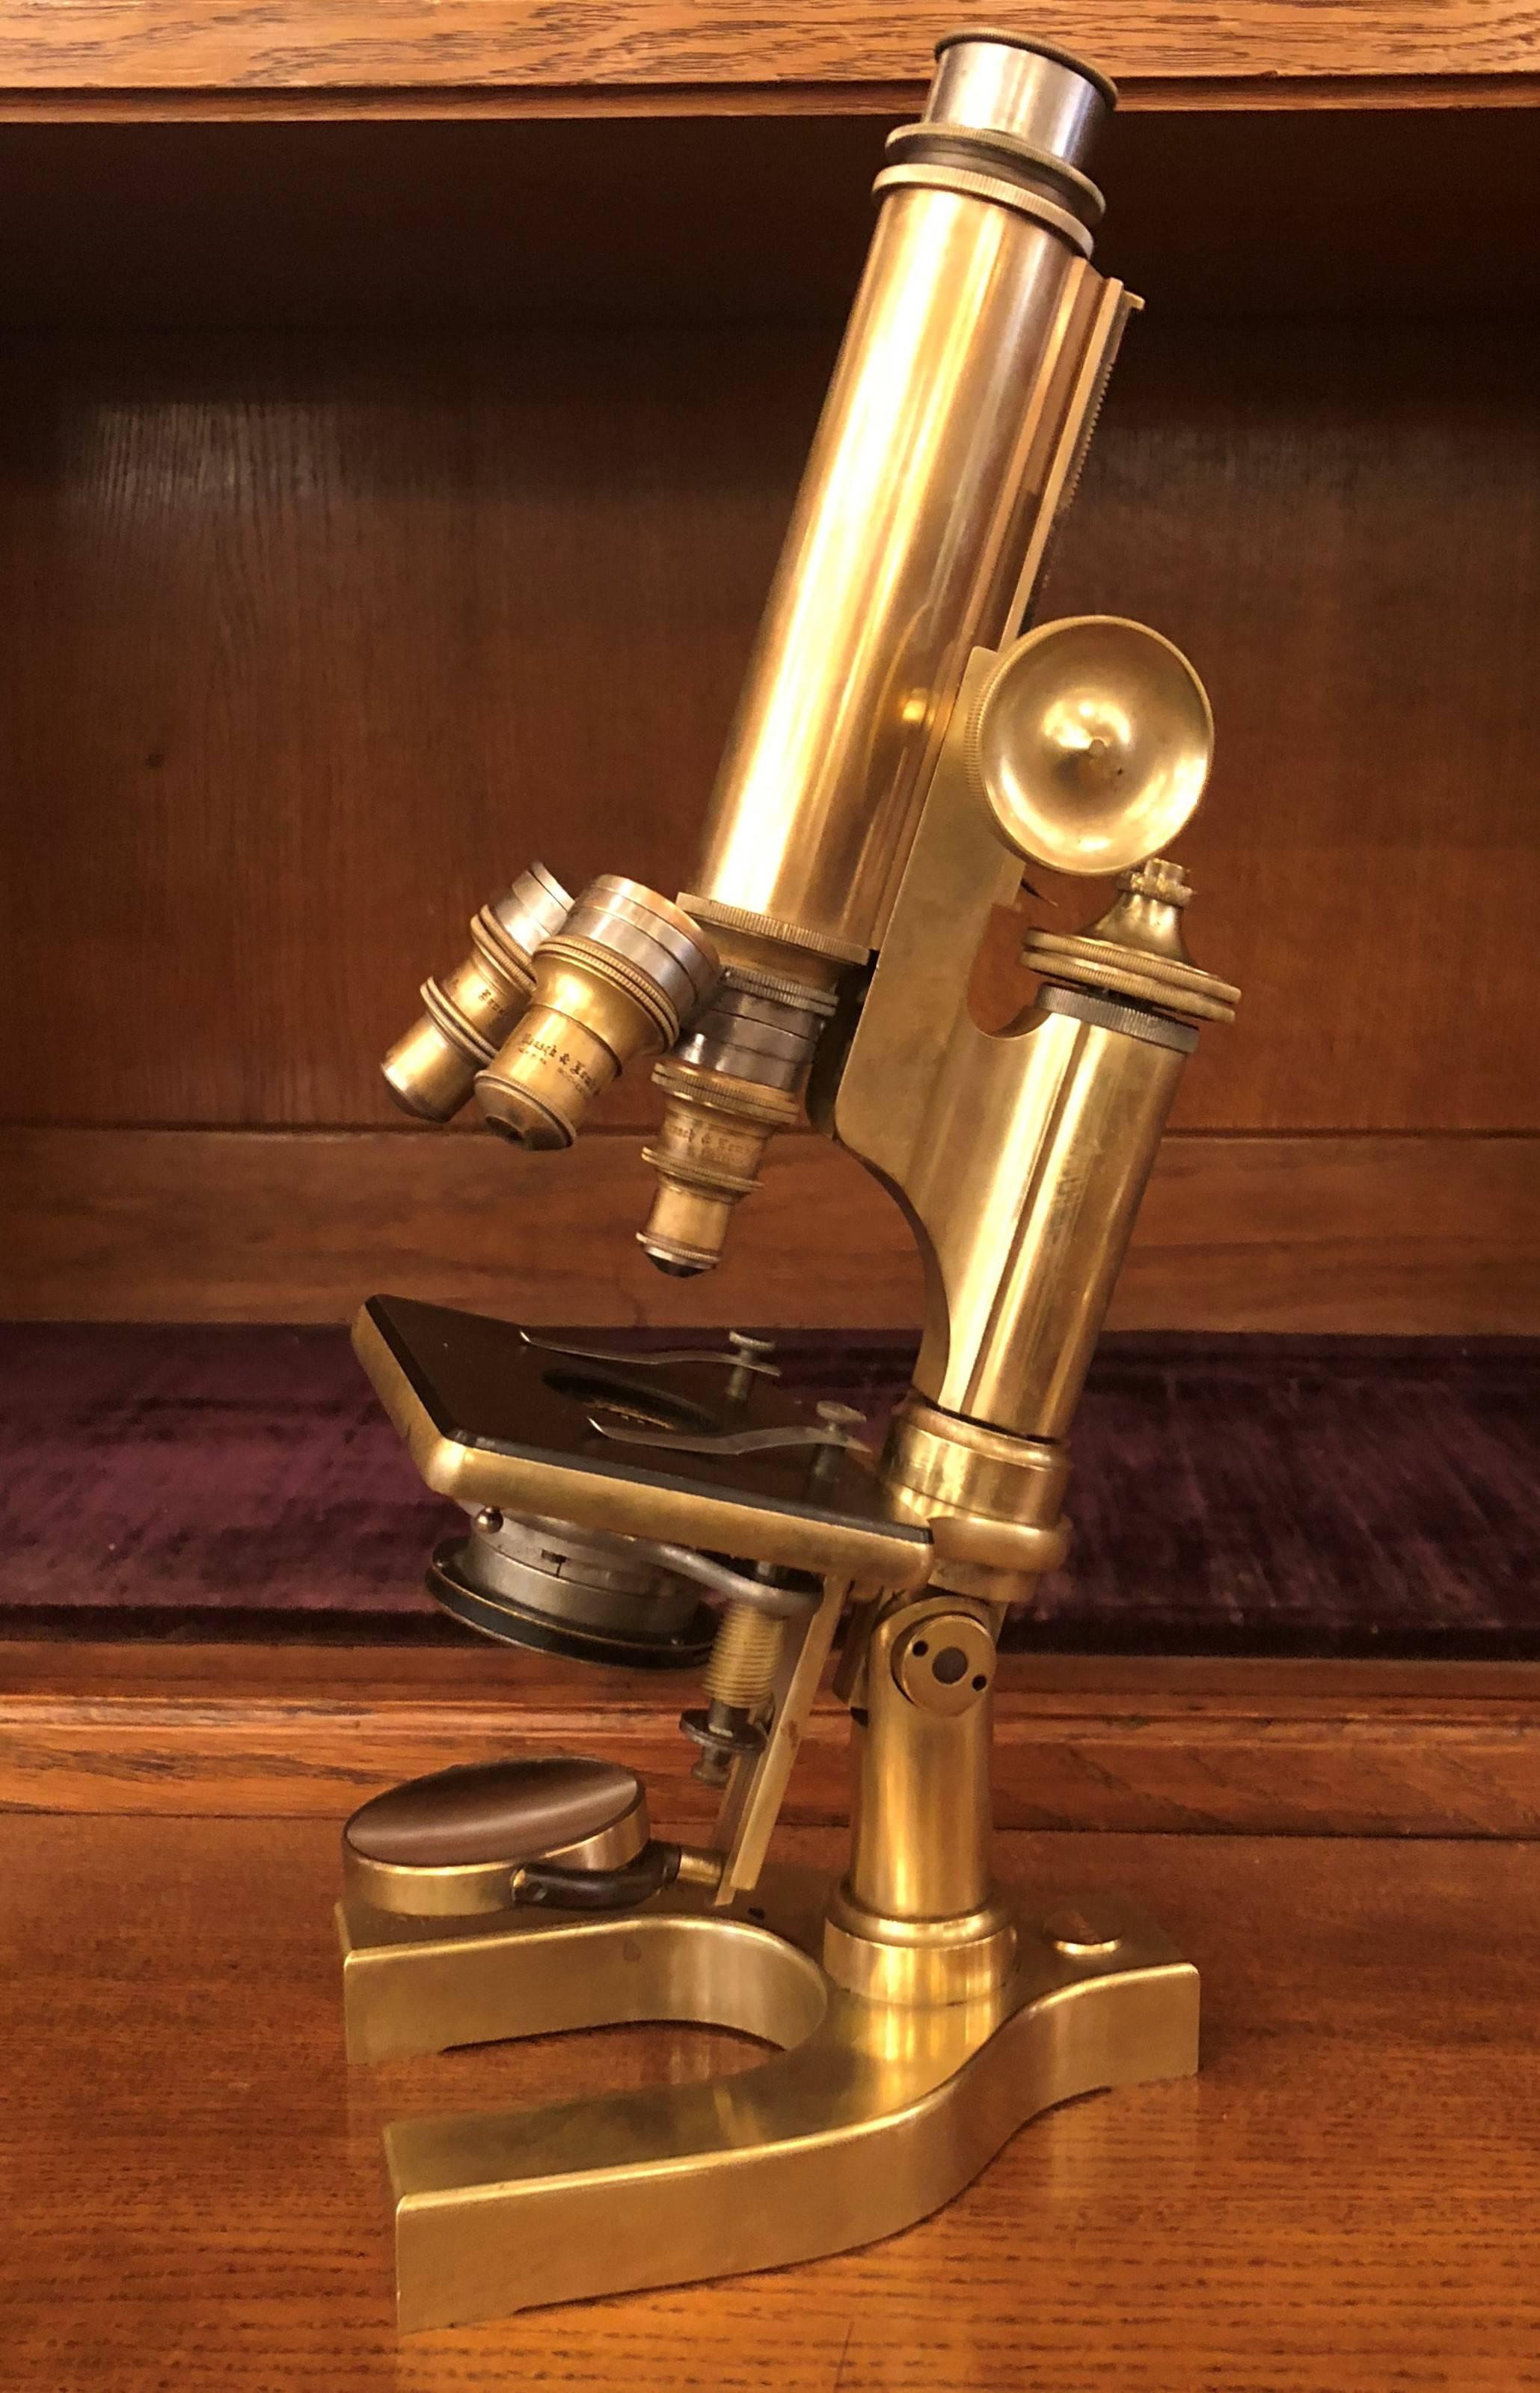 Antique 19th century American compound monocular microscope signed Bausch and Lomb Co., circa 1890.